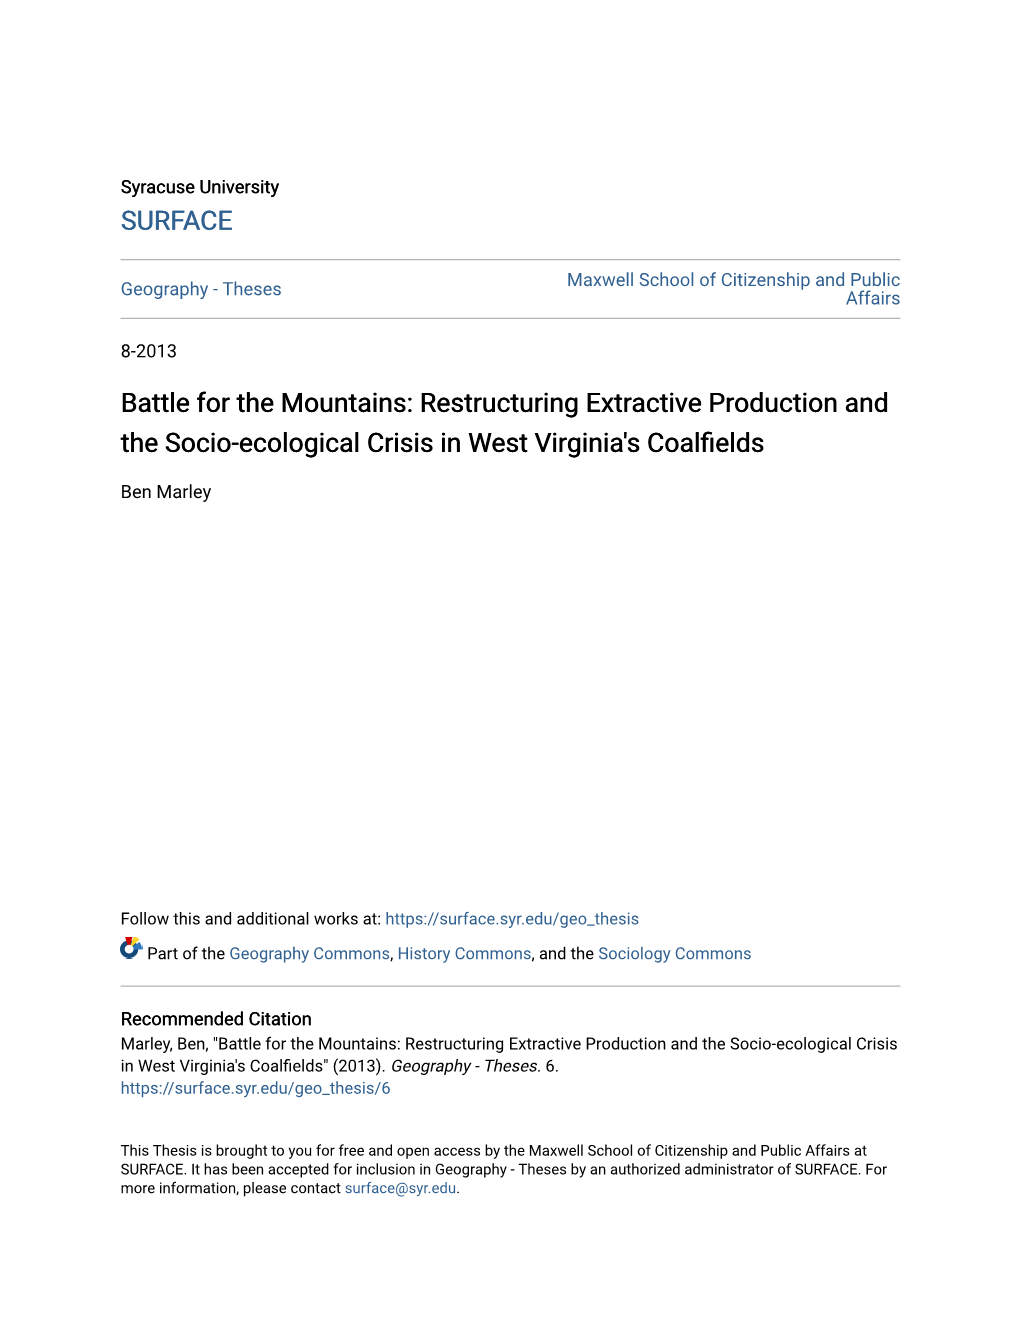 Restructuring Extractive Production and the Socio-Ecological Crisis in West Virginia's Coalfields